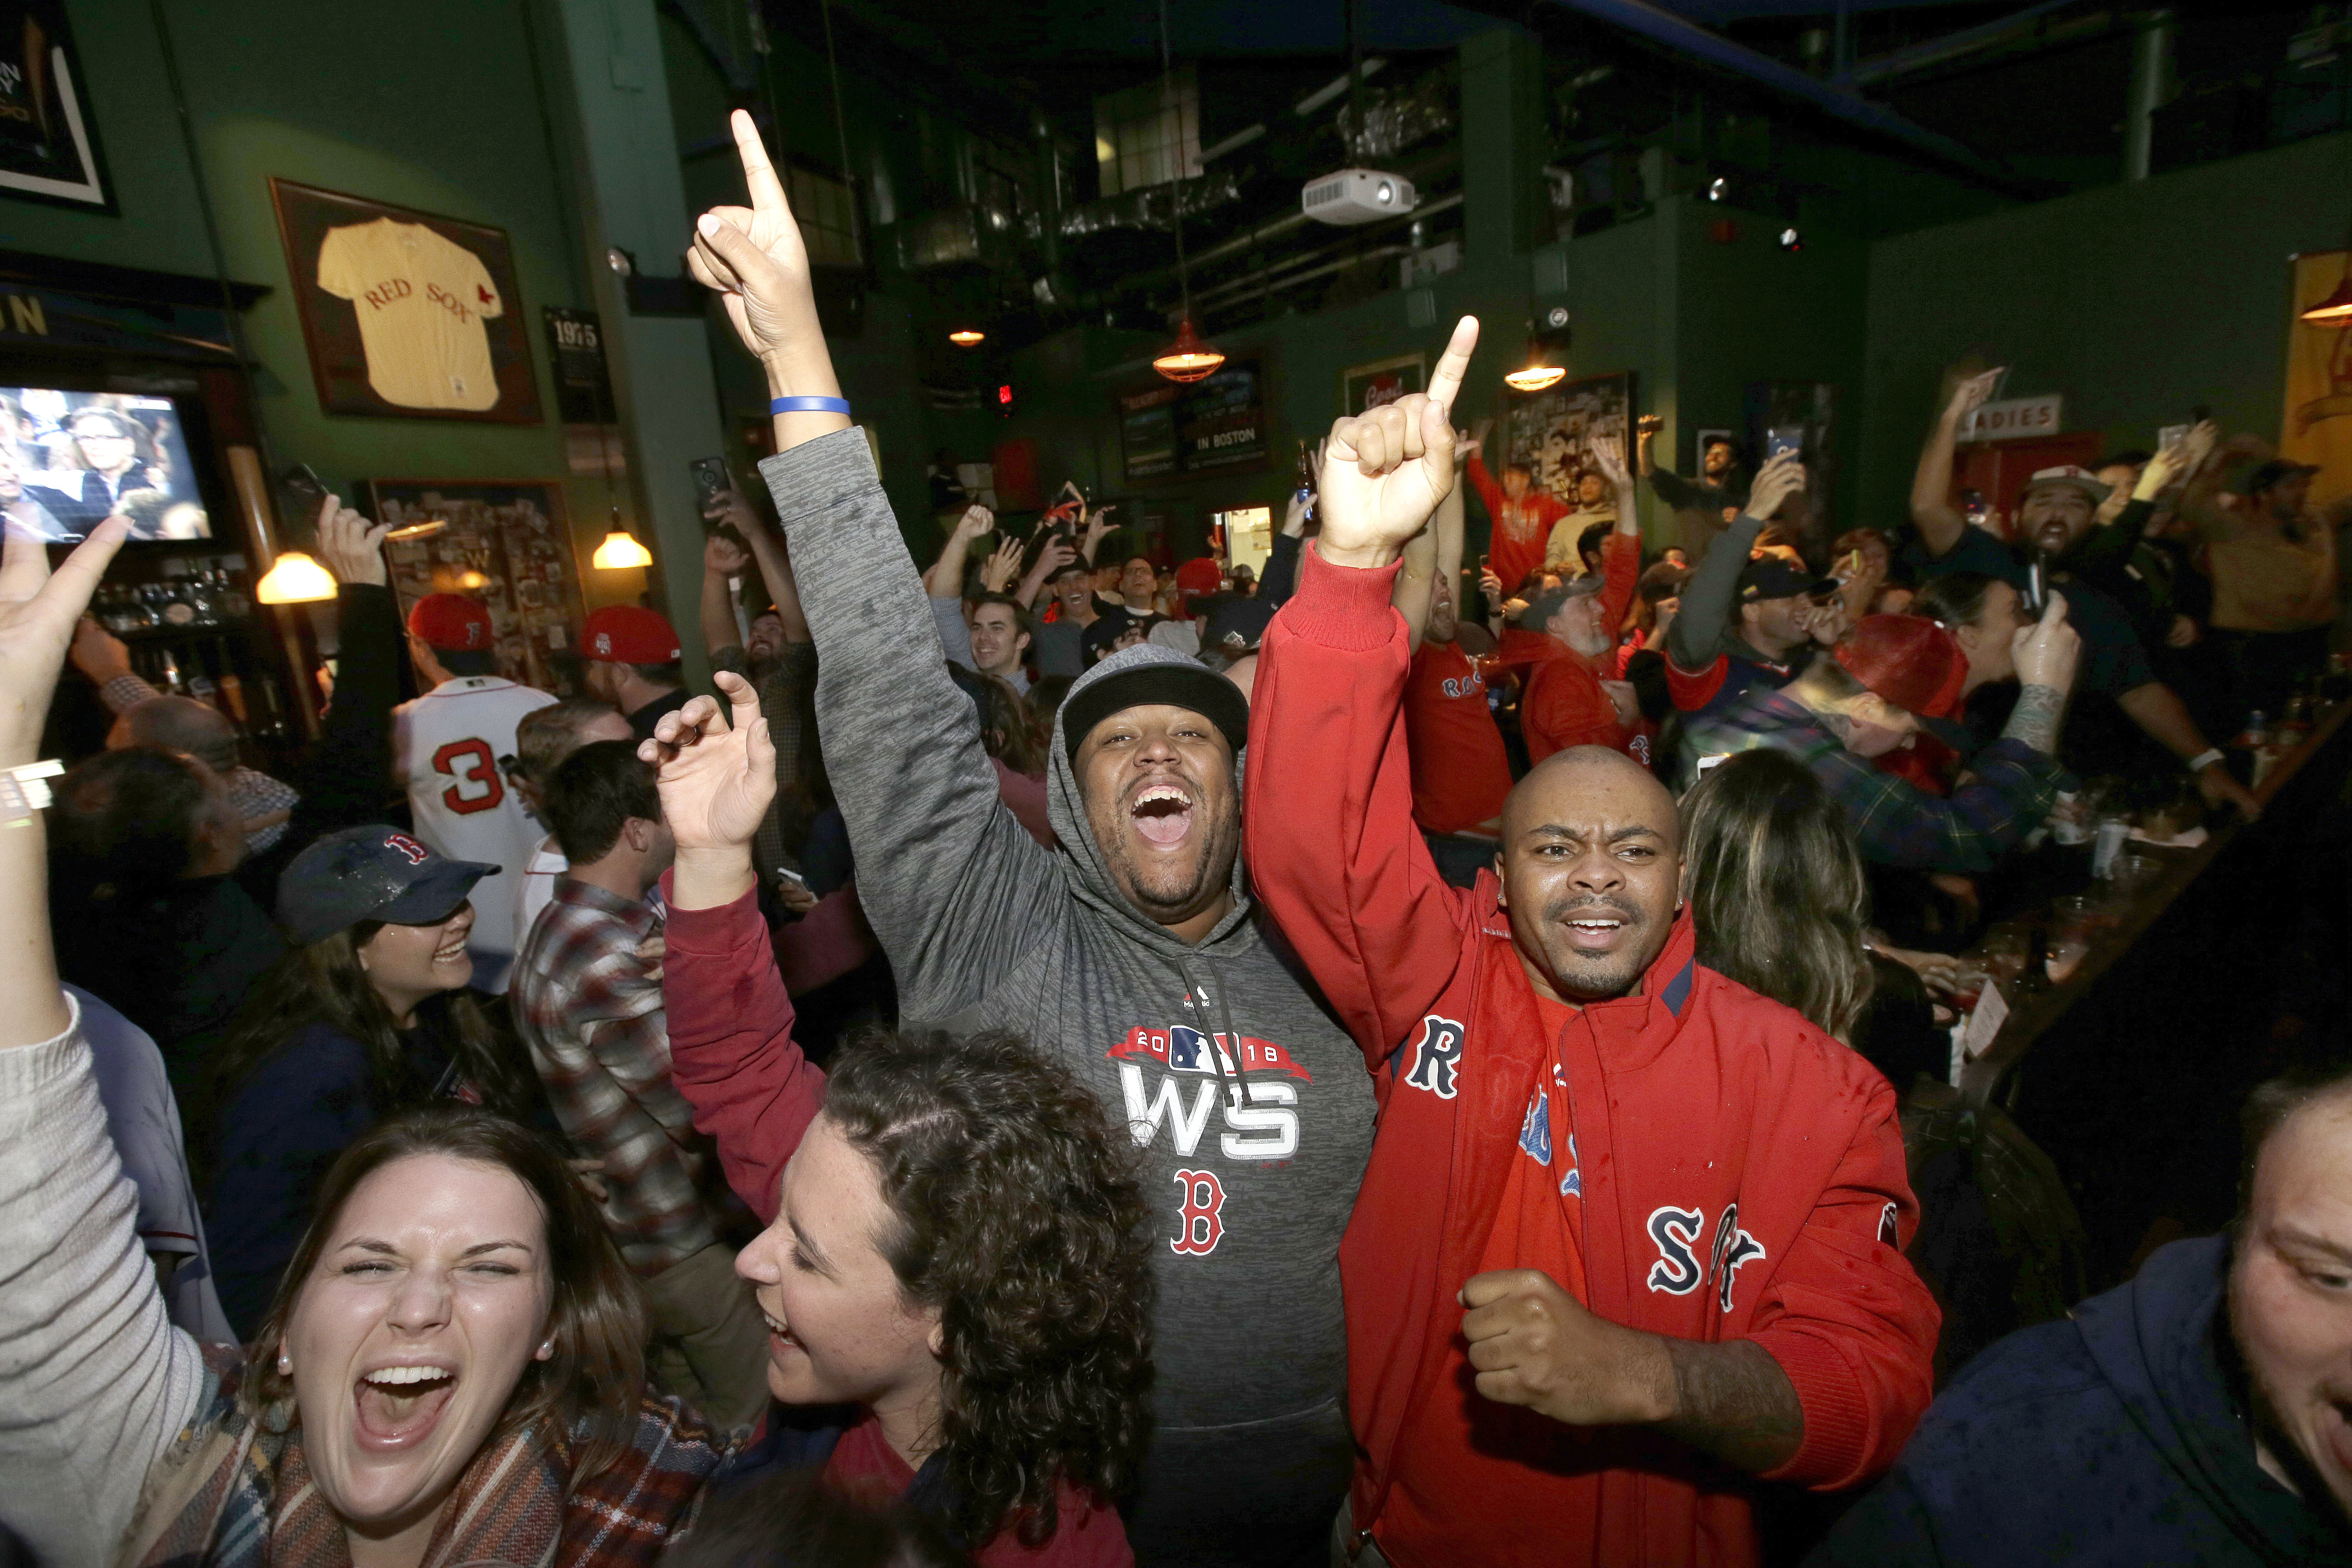 Red Sox fans celebrate latest title; parade on Wednesday